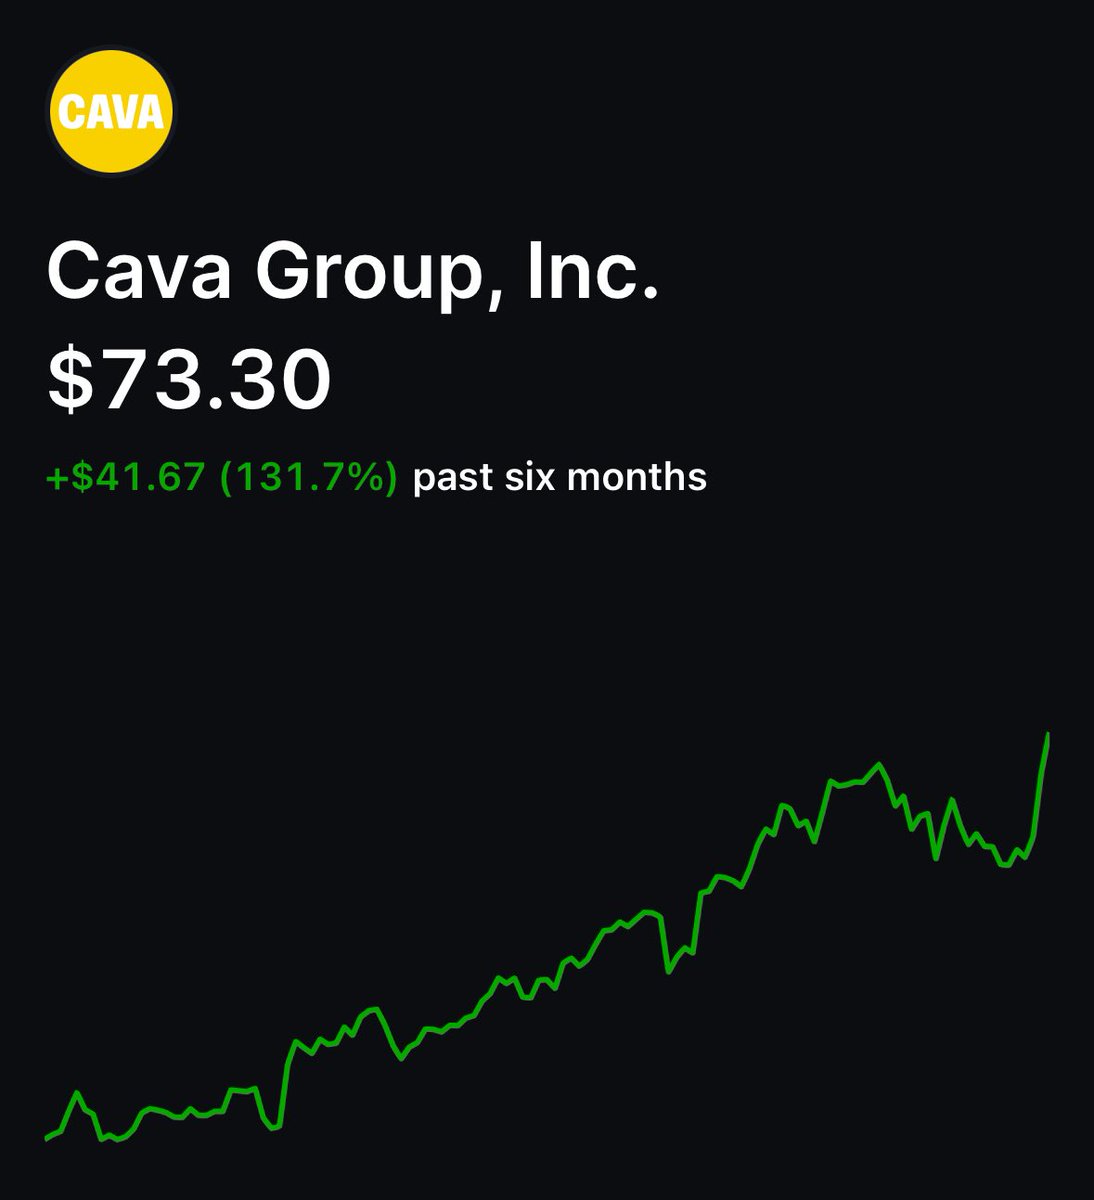 New ATH’s Trimmed a Few More Today. Now get to let the rest ride risk free. Congrats shareholders! $CAVA